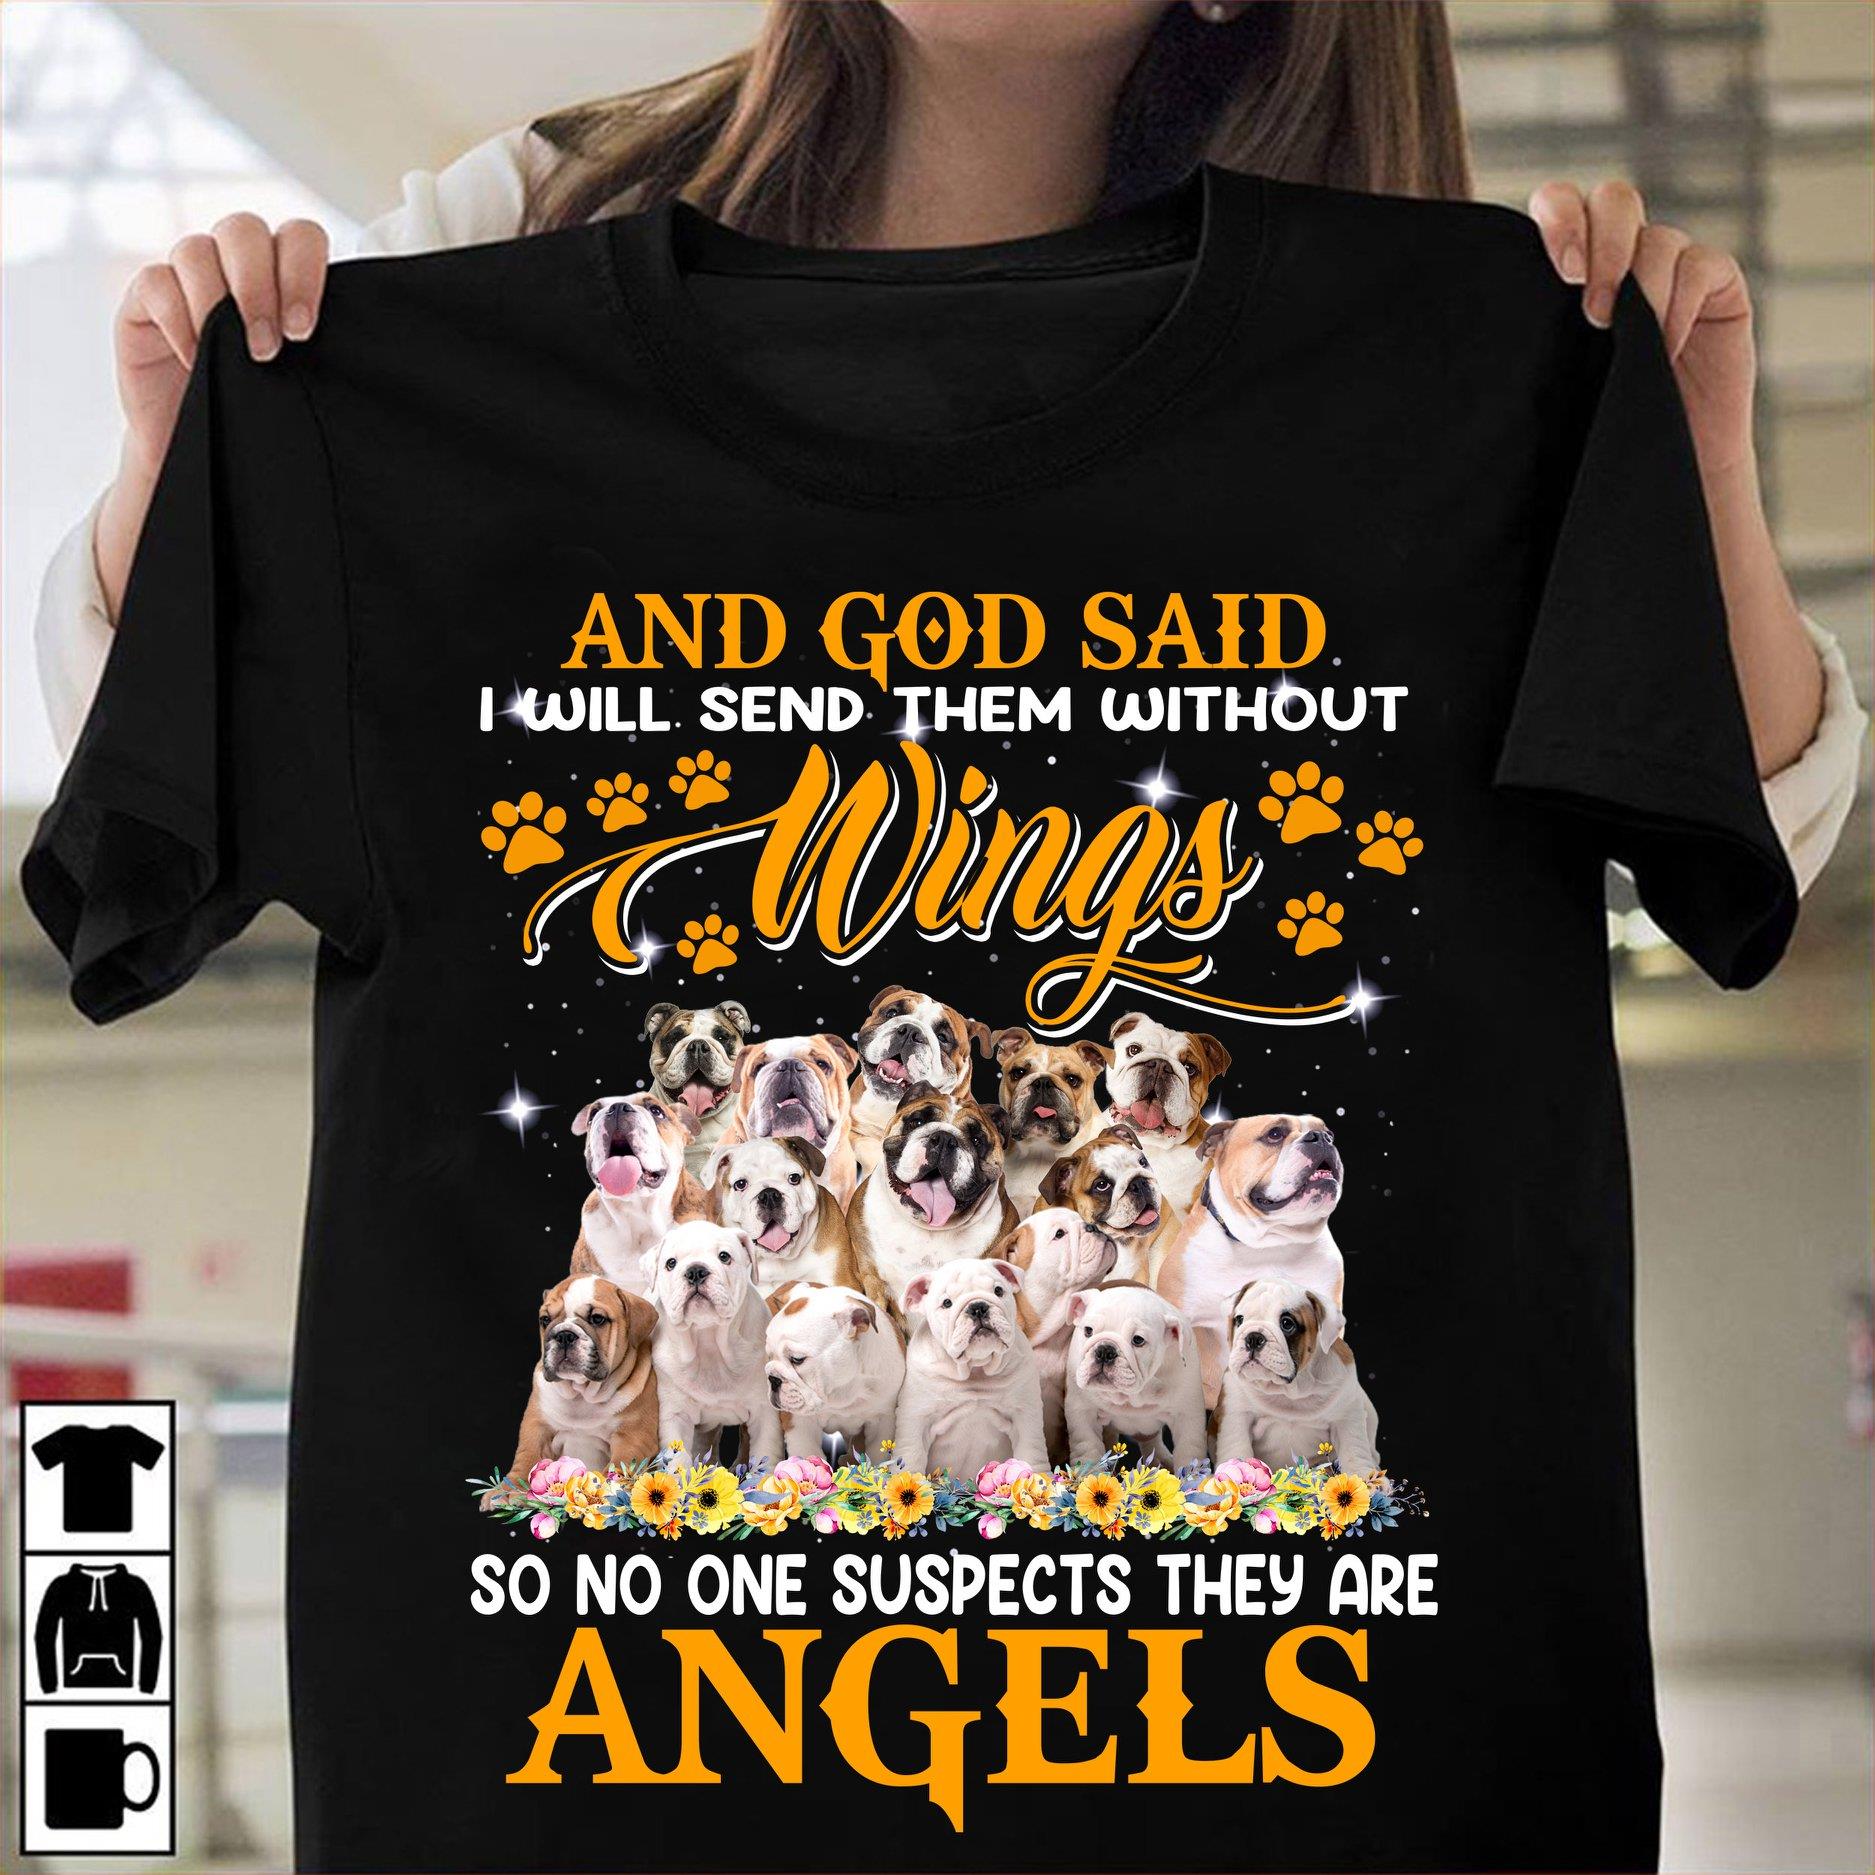 And god said I will send them without wings so no one suspects they are angels - Pug dog